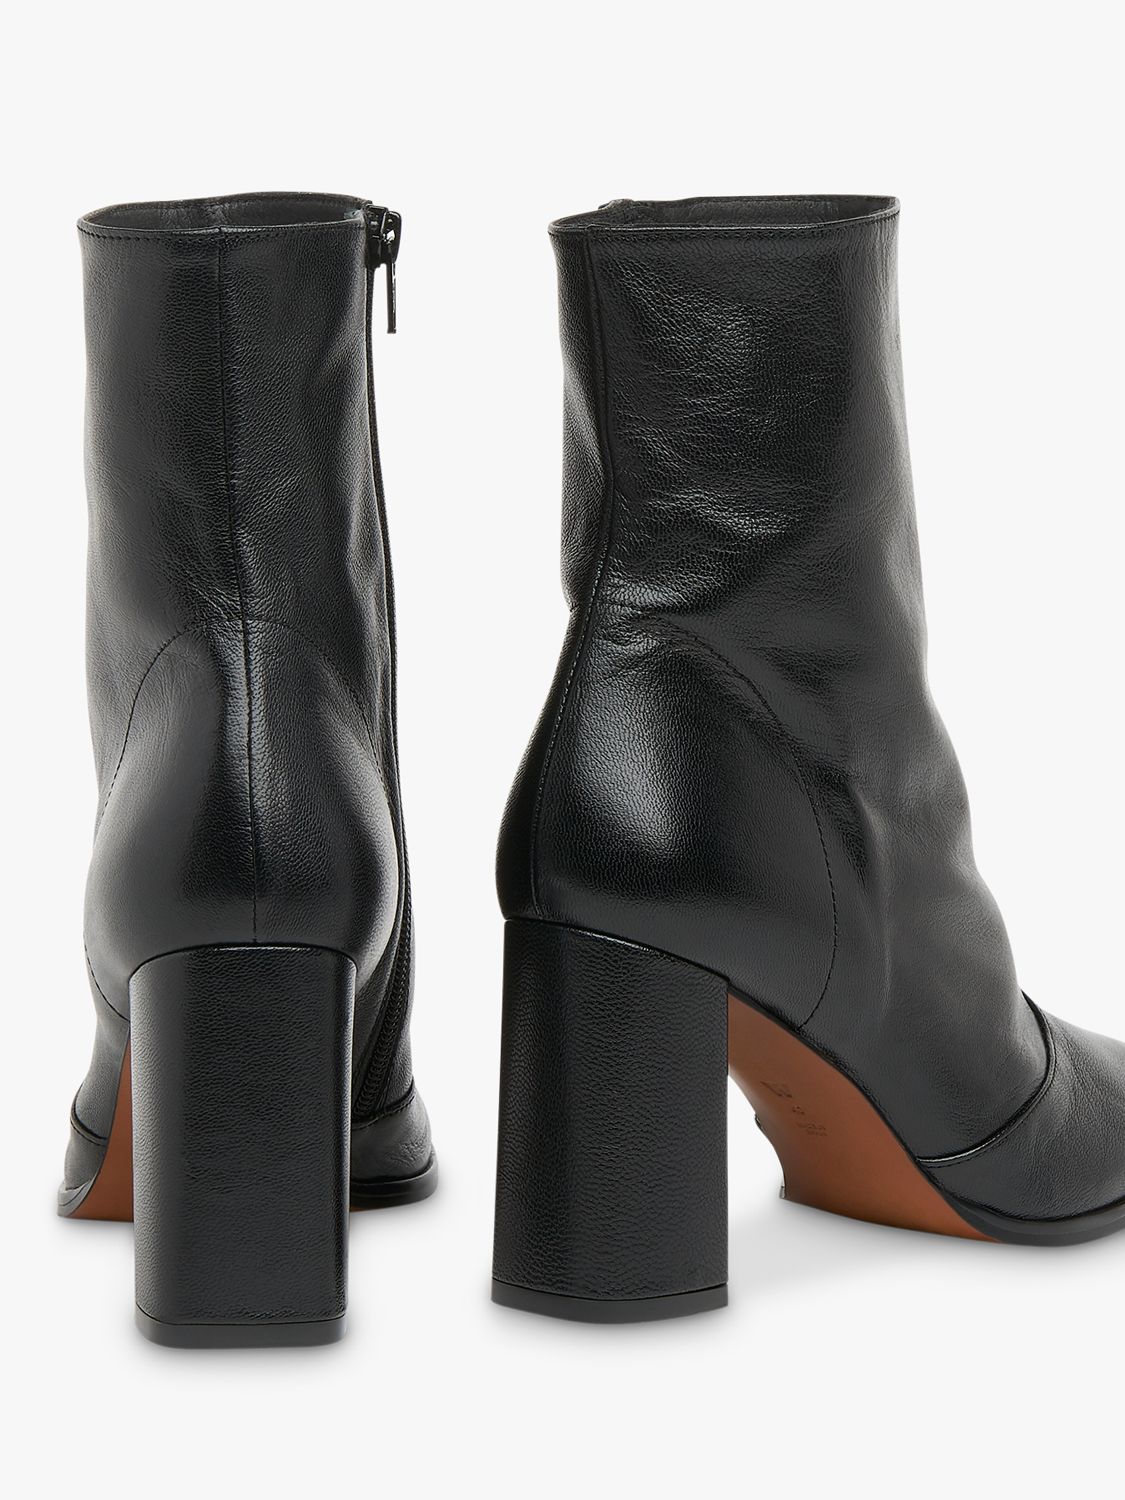 Whistles Dina Leather Heeled Boots, Black at John Lewis & Partners